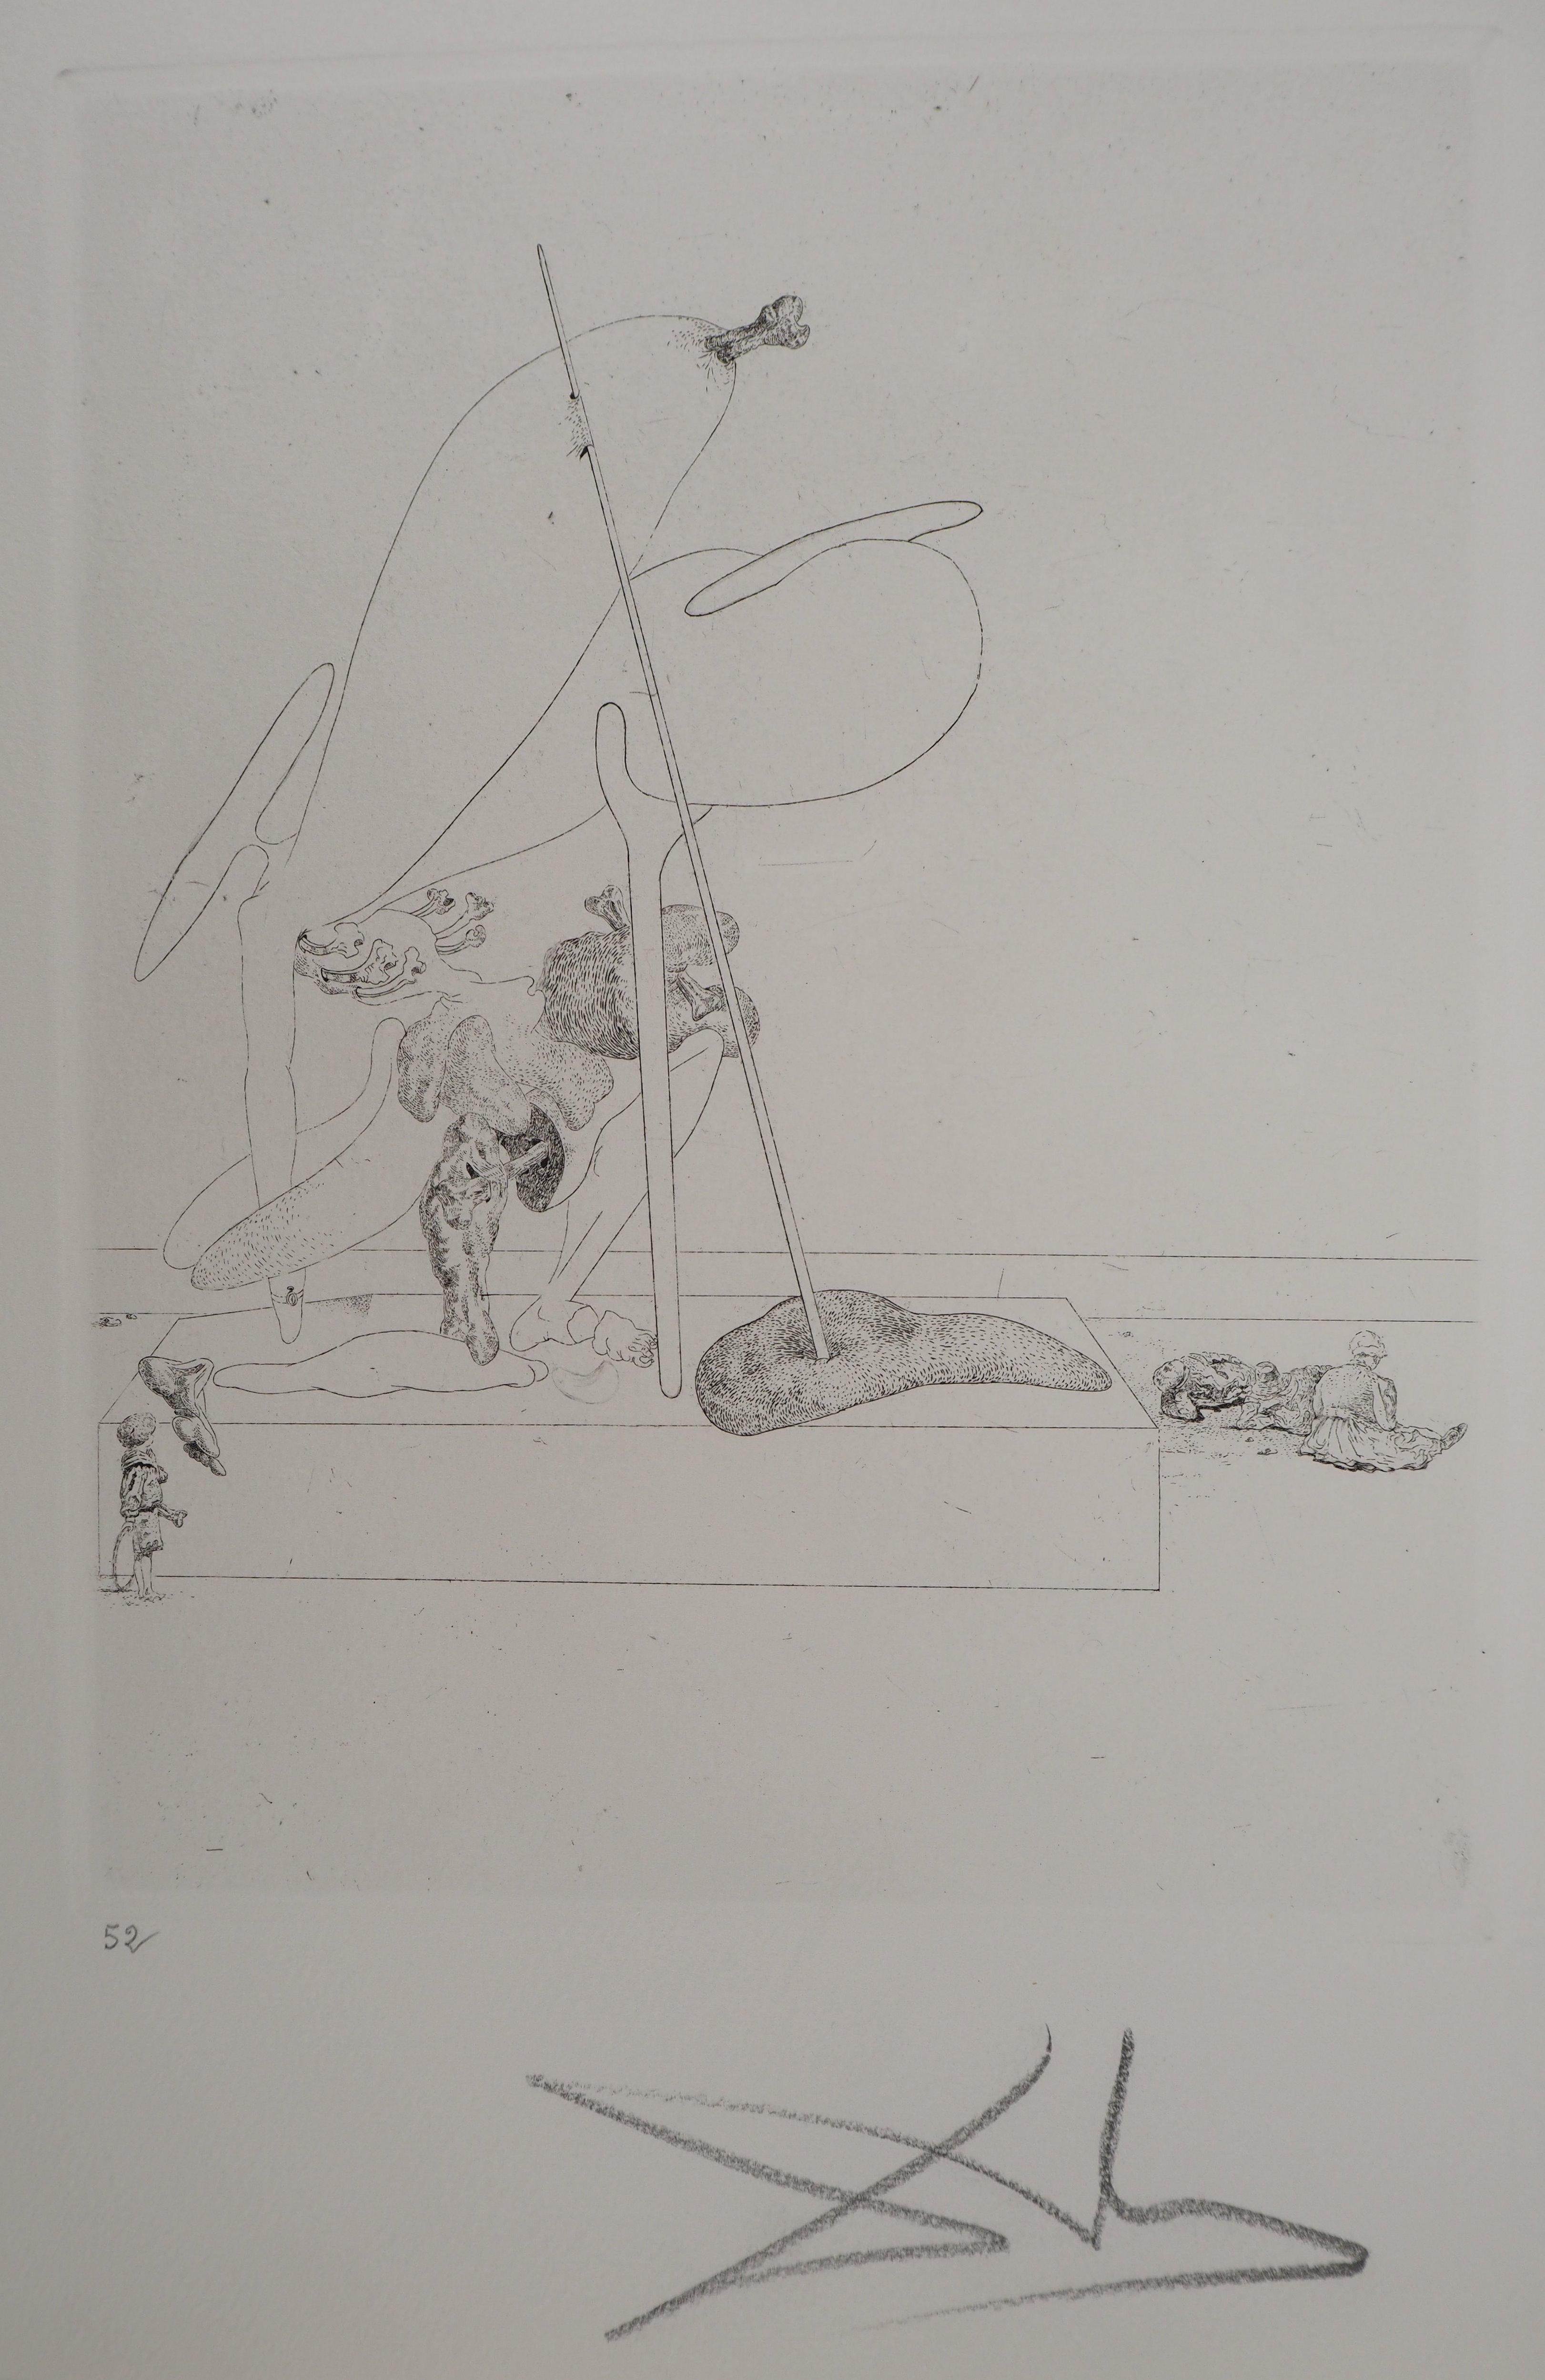 Maldoror, Surrealist Figure with Crutch - Original etching SIGNED, Field #34-2 - Print by Salvador Dalí